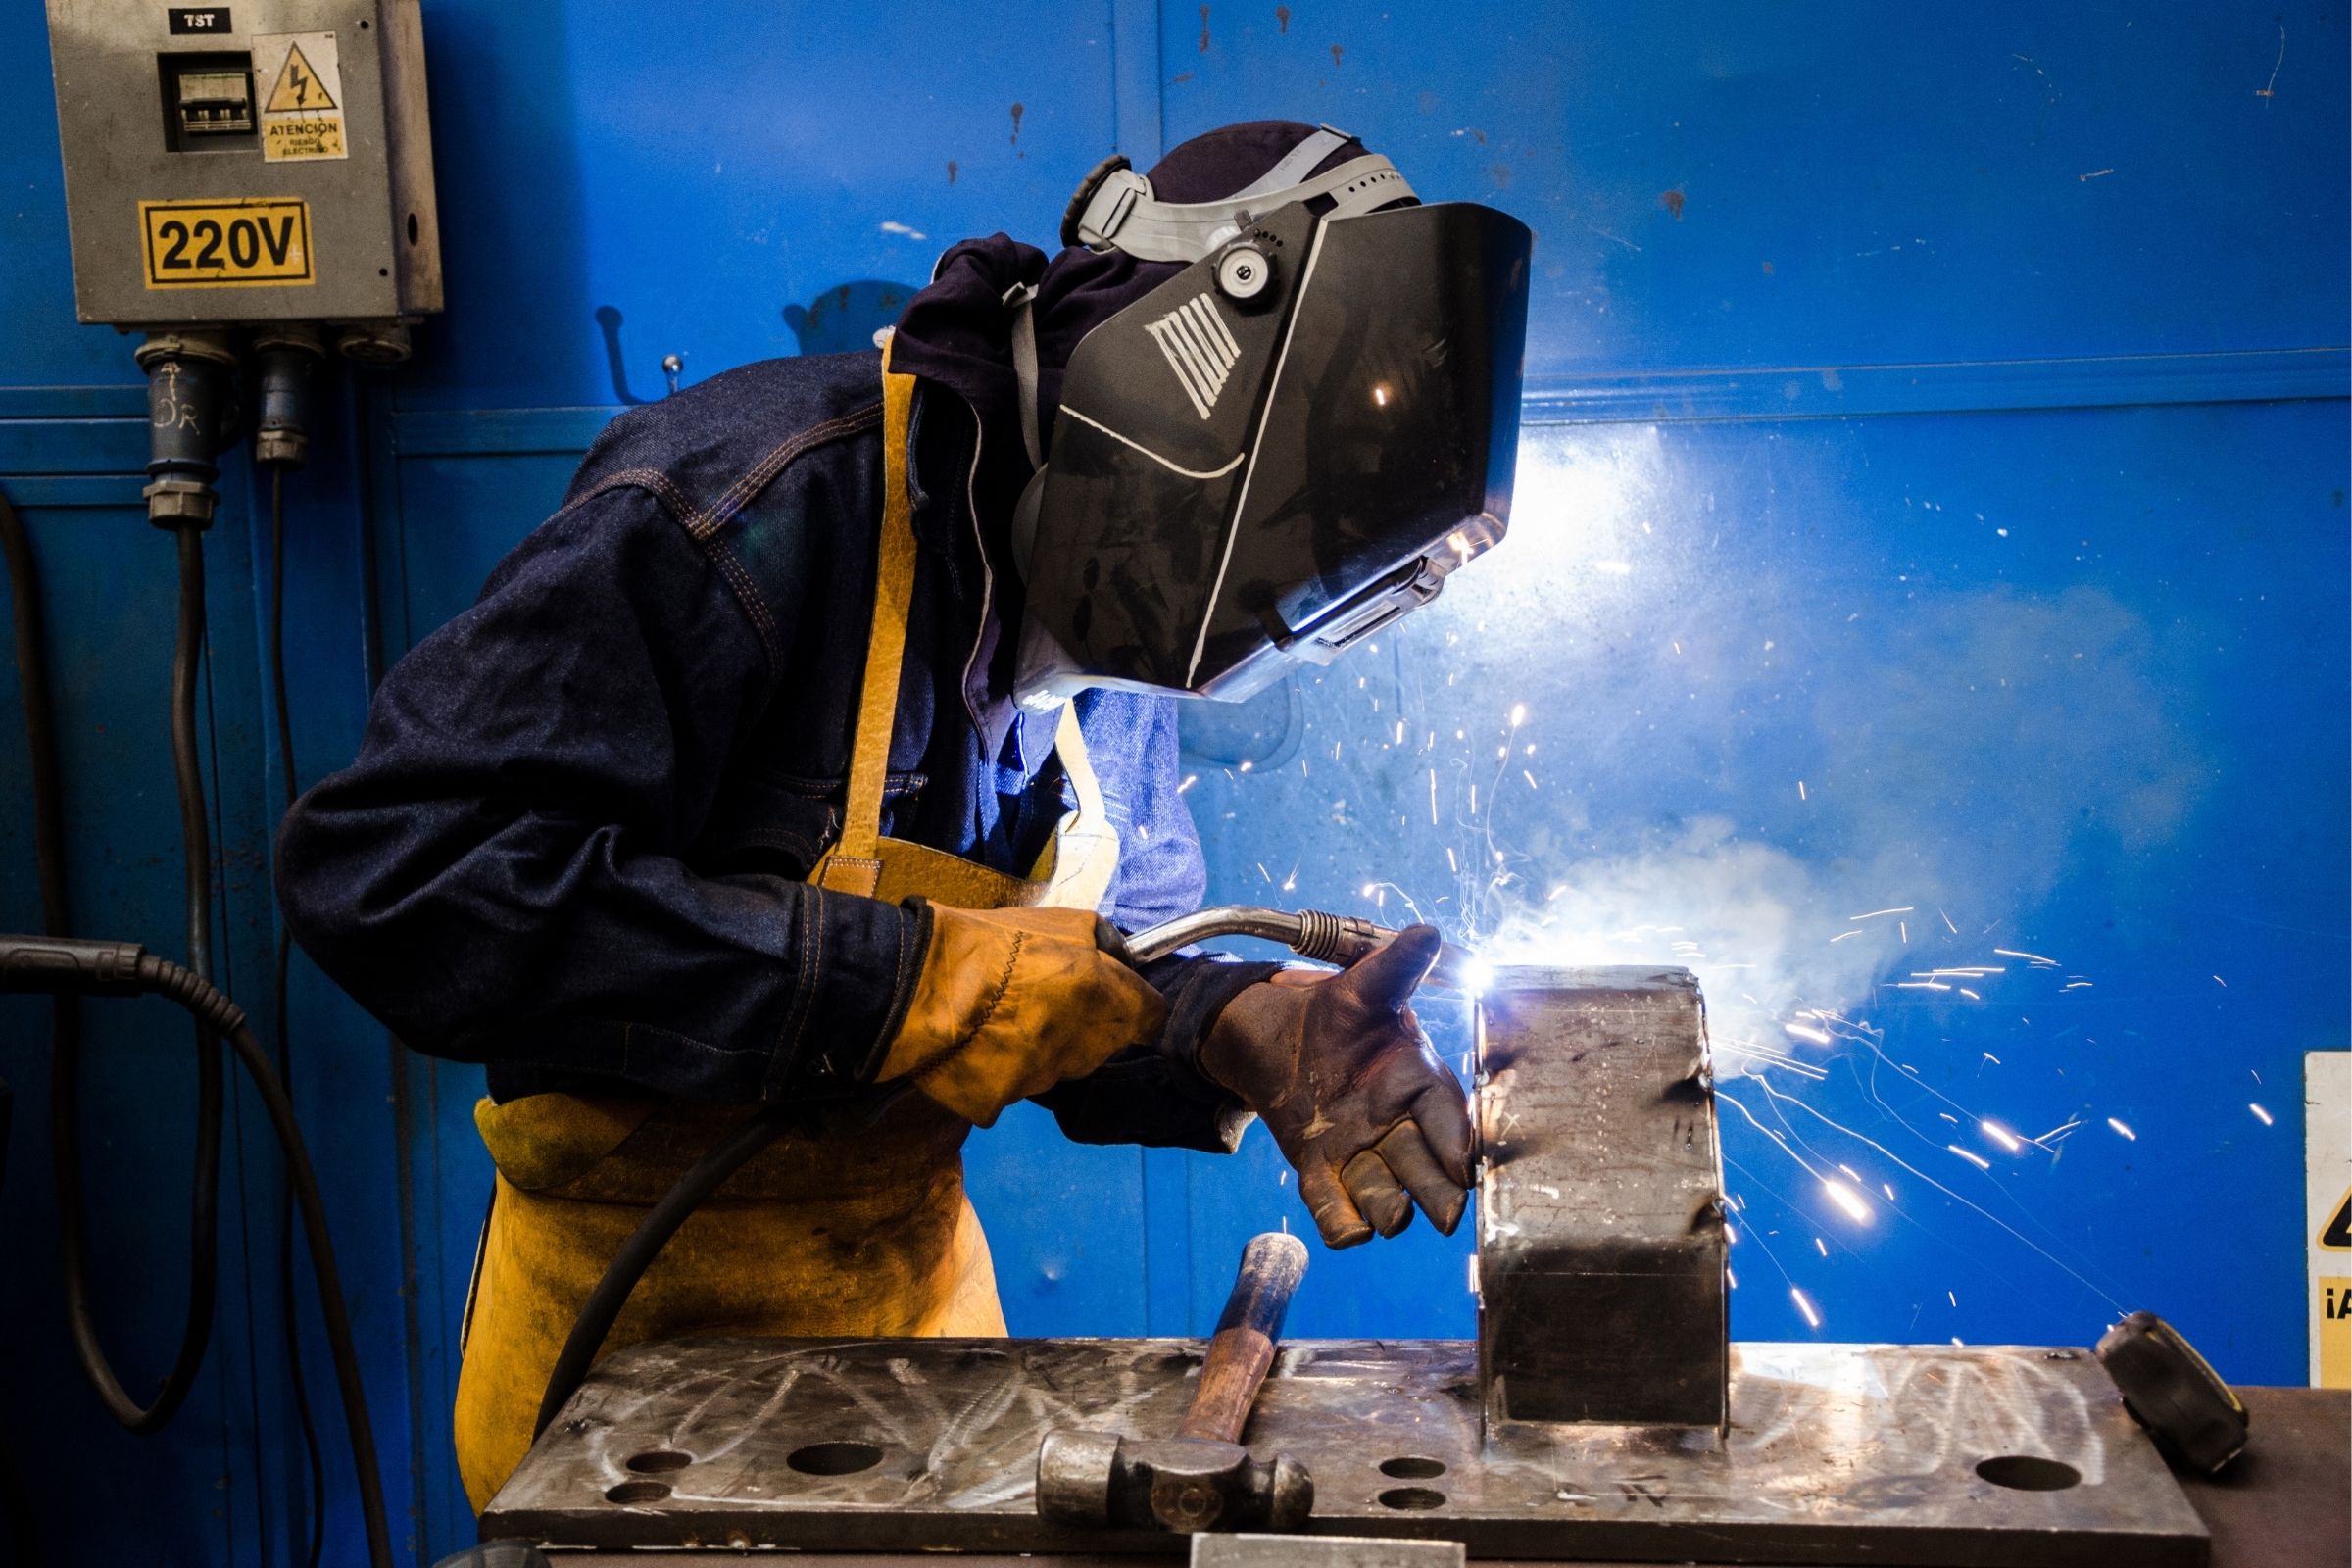 wearing protective eye wear and protective gloves while welding 